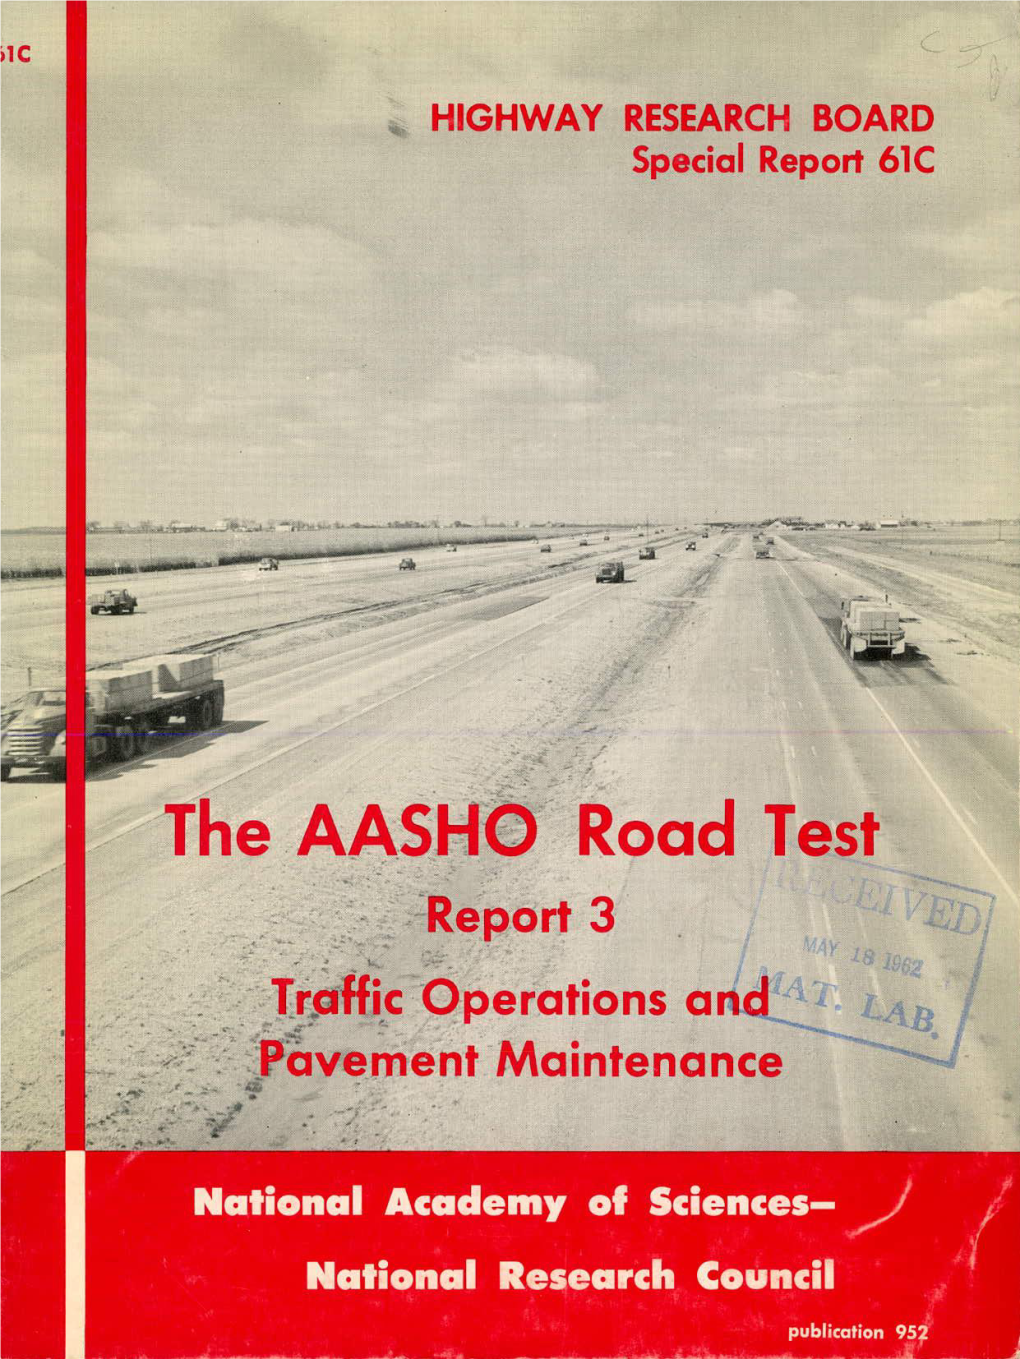 The. AA.SHO Road Test Report 3� 7 Trottic Operations and Pavement Maintenance HIGHWAY RESEARCH 'BOARD Officers and Members of 'The Executive Committee 1962